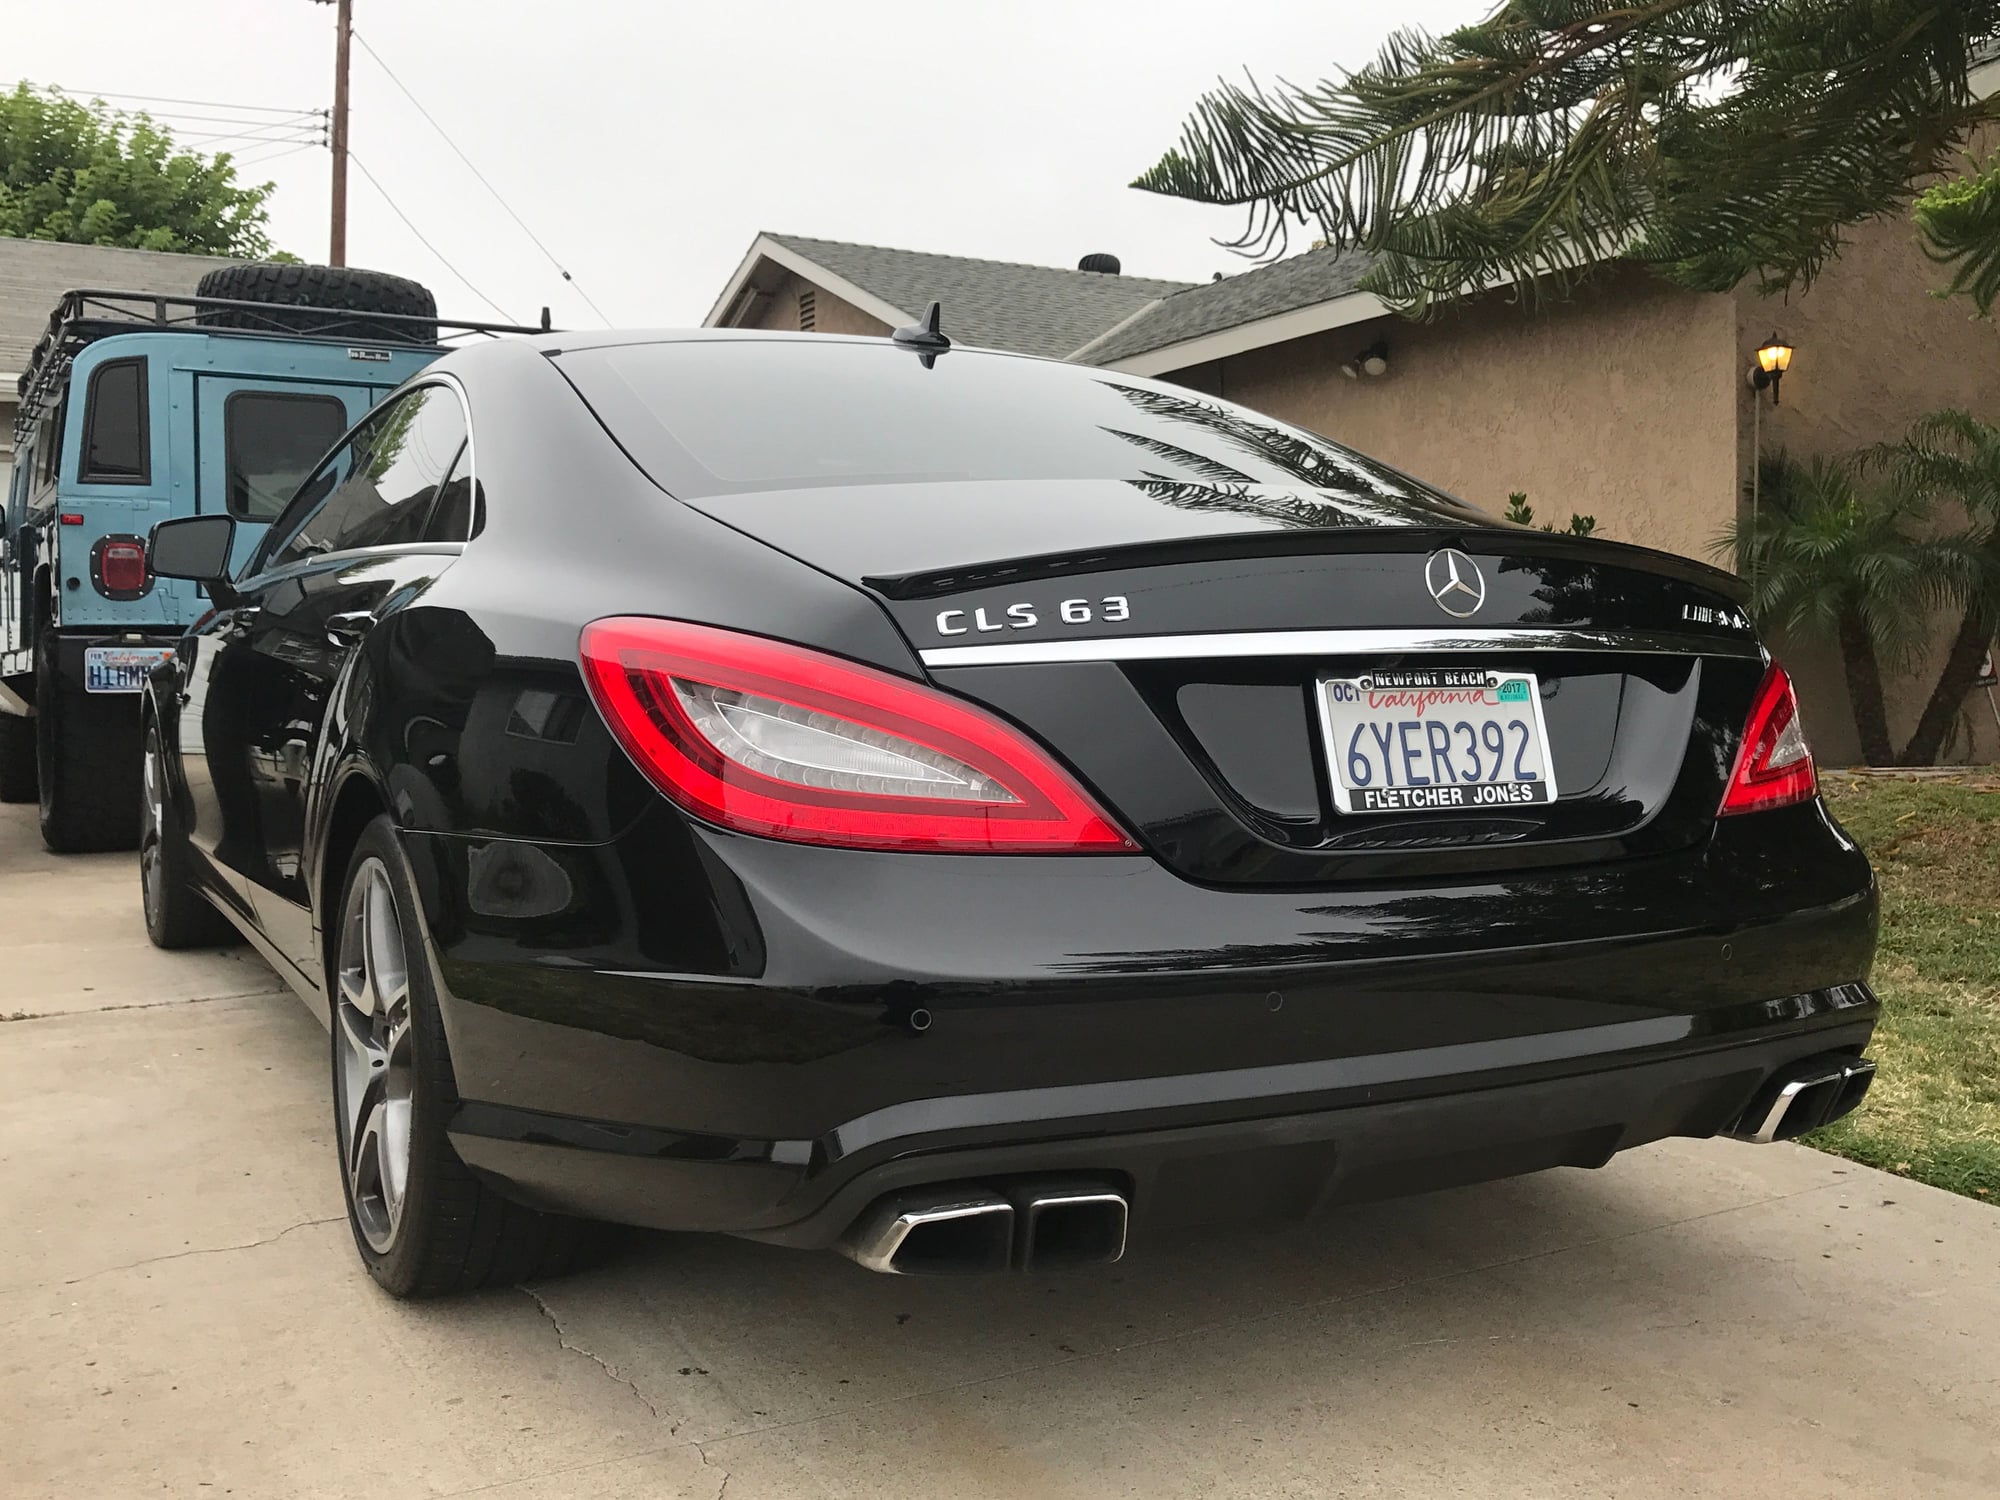 2012 Mercedes-Benz CLS63 AMG - 2012 CLS63 Mint Condition Low Miles - Used - VIN WDDLJ7EB3CA023970 - 38,150 Miles - 8 cyl - 2WD - Automatic - Sedan - Black - Buena Park, CA 90620, United States